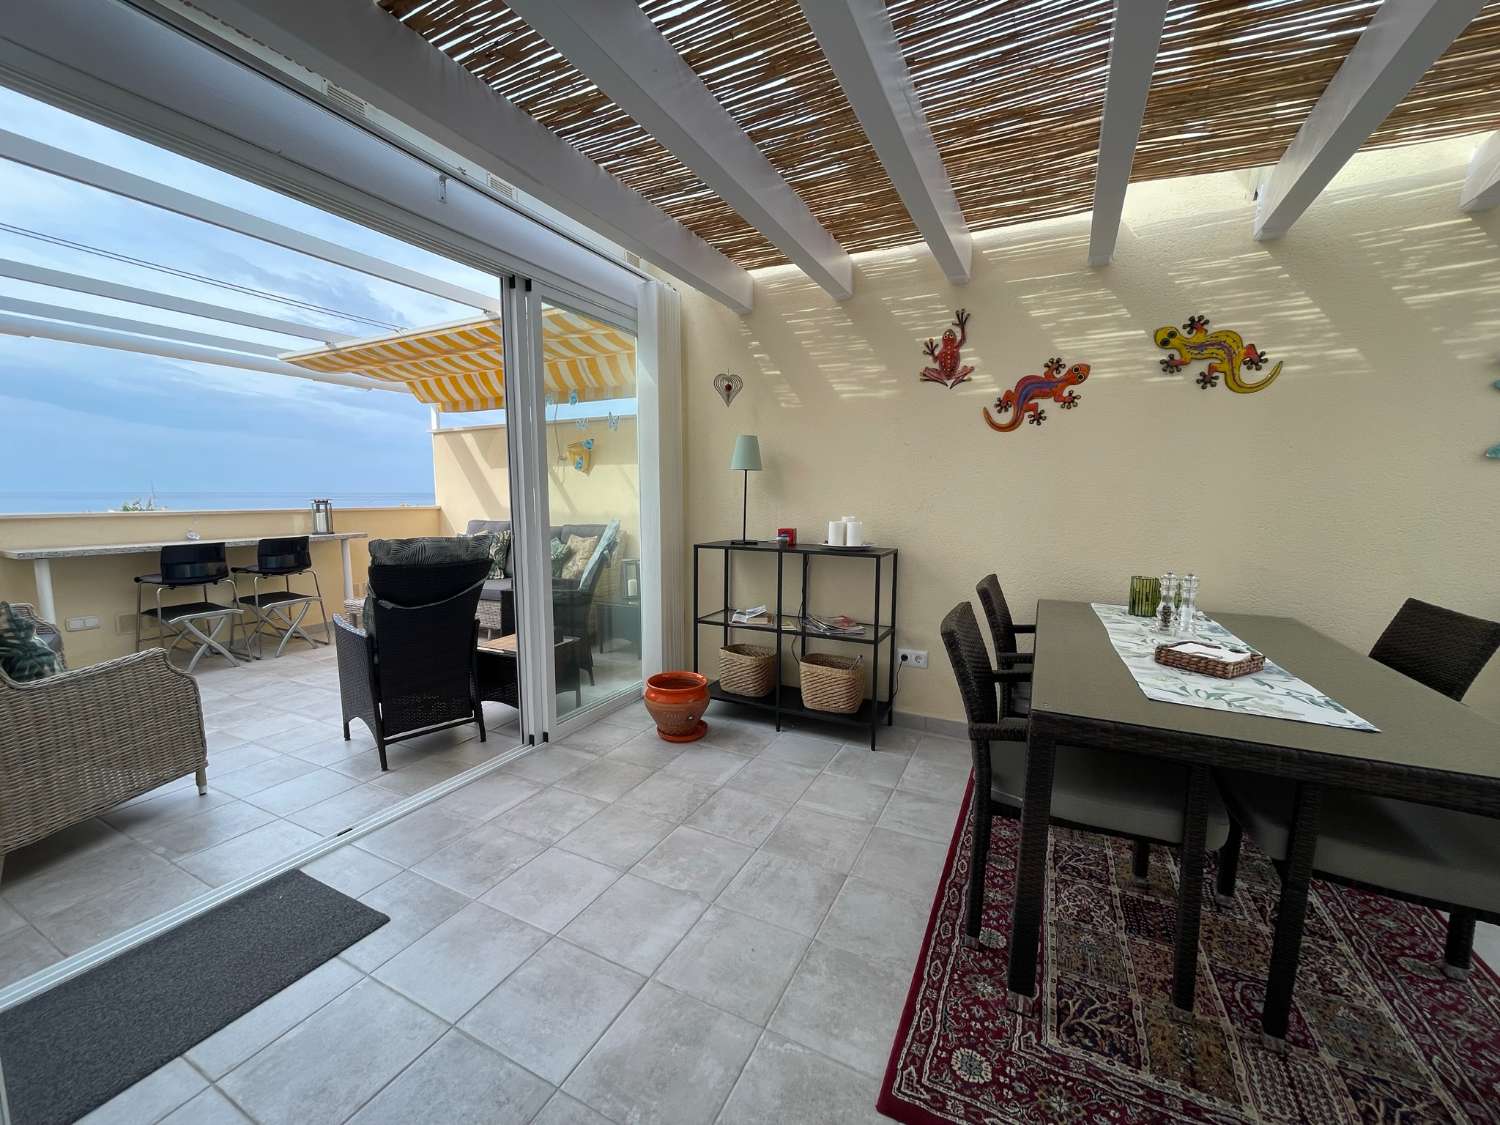 Two-bedroom penthouse for sale in the Torrecilla area, Nerja